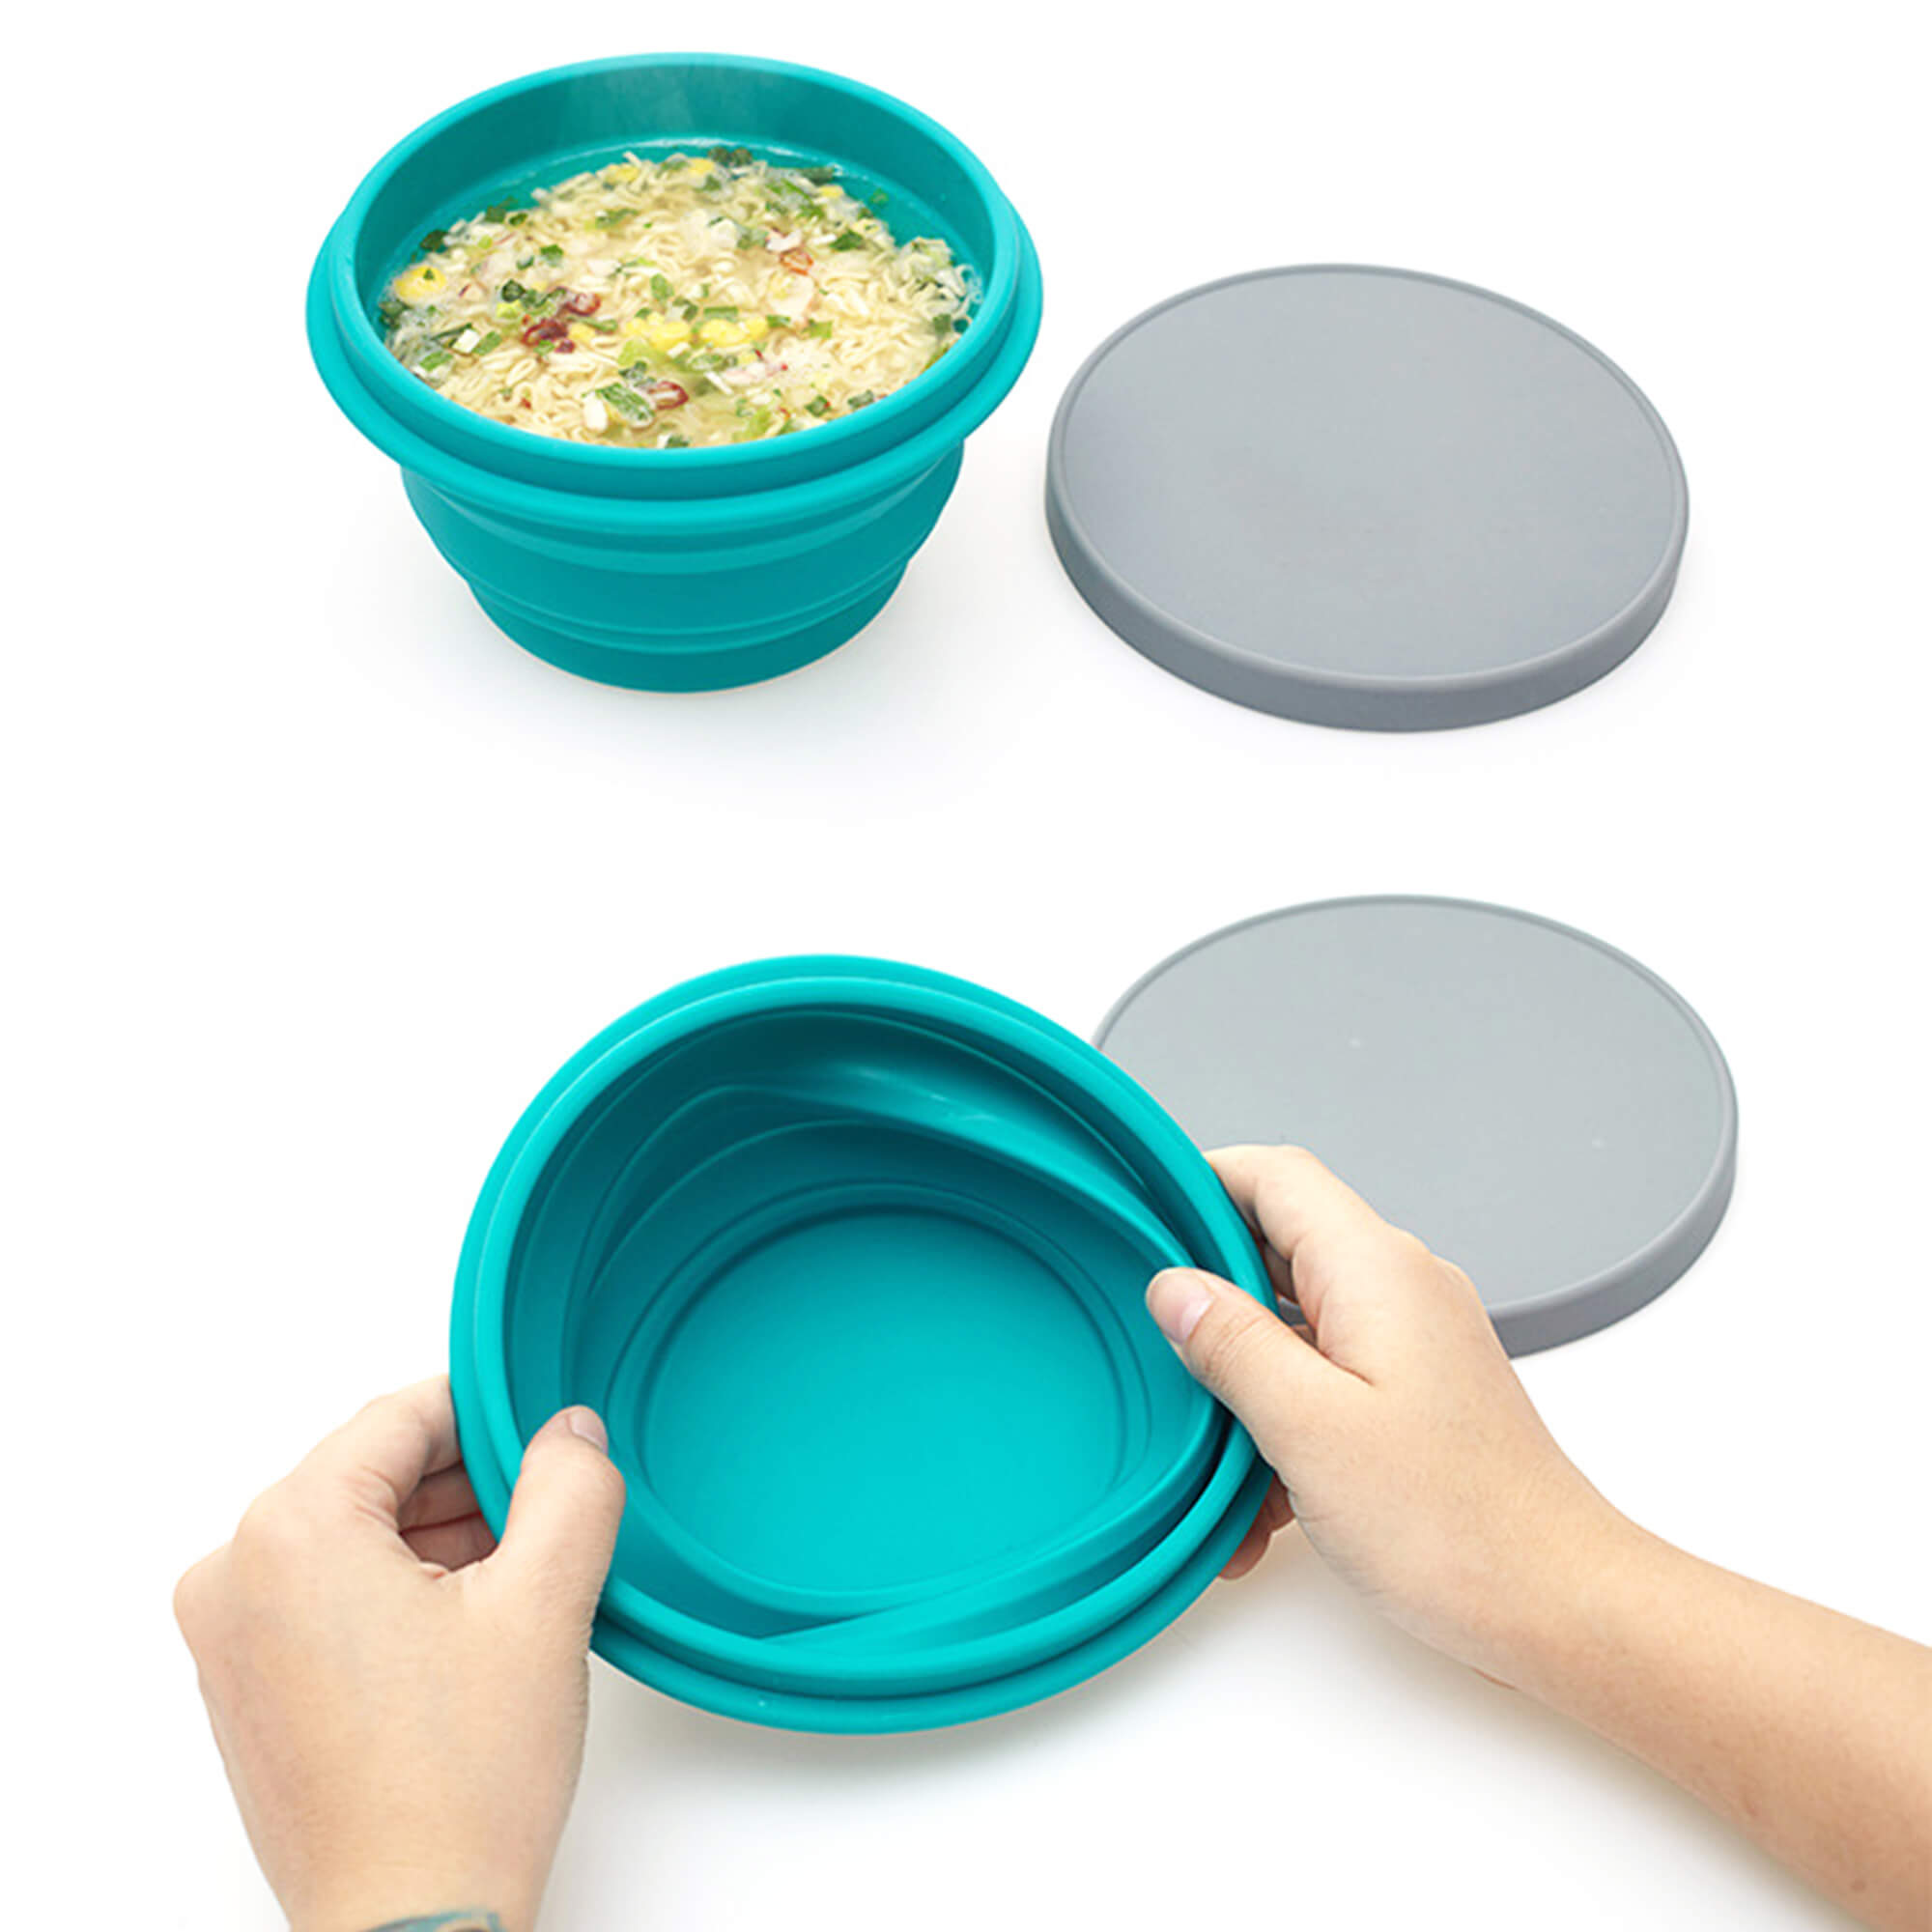 ZERO WASTE COLLAPSIBLE BOWLS